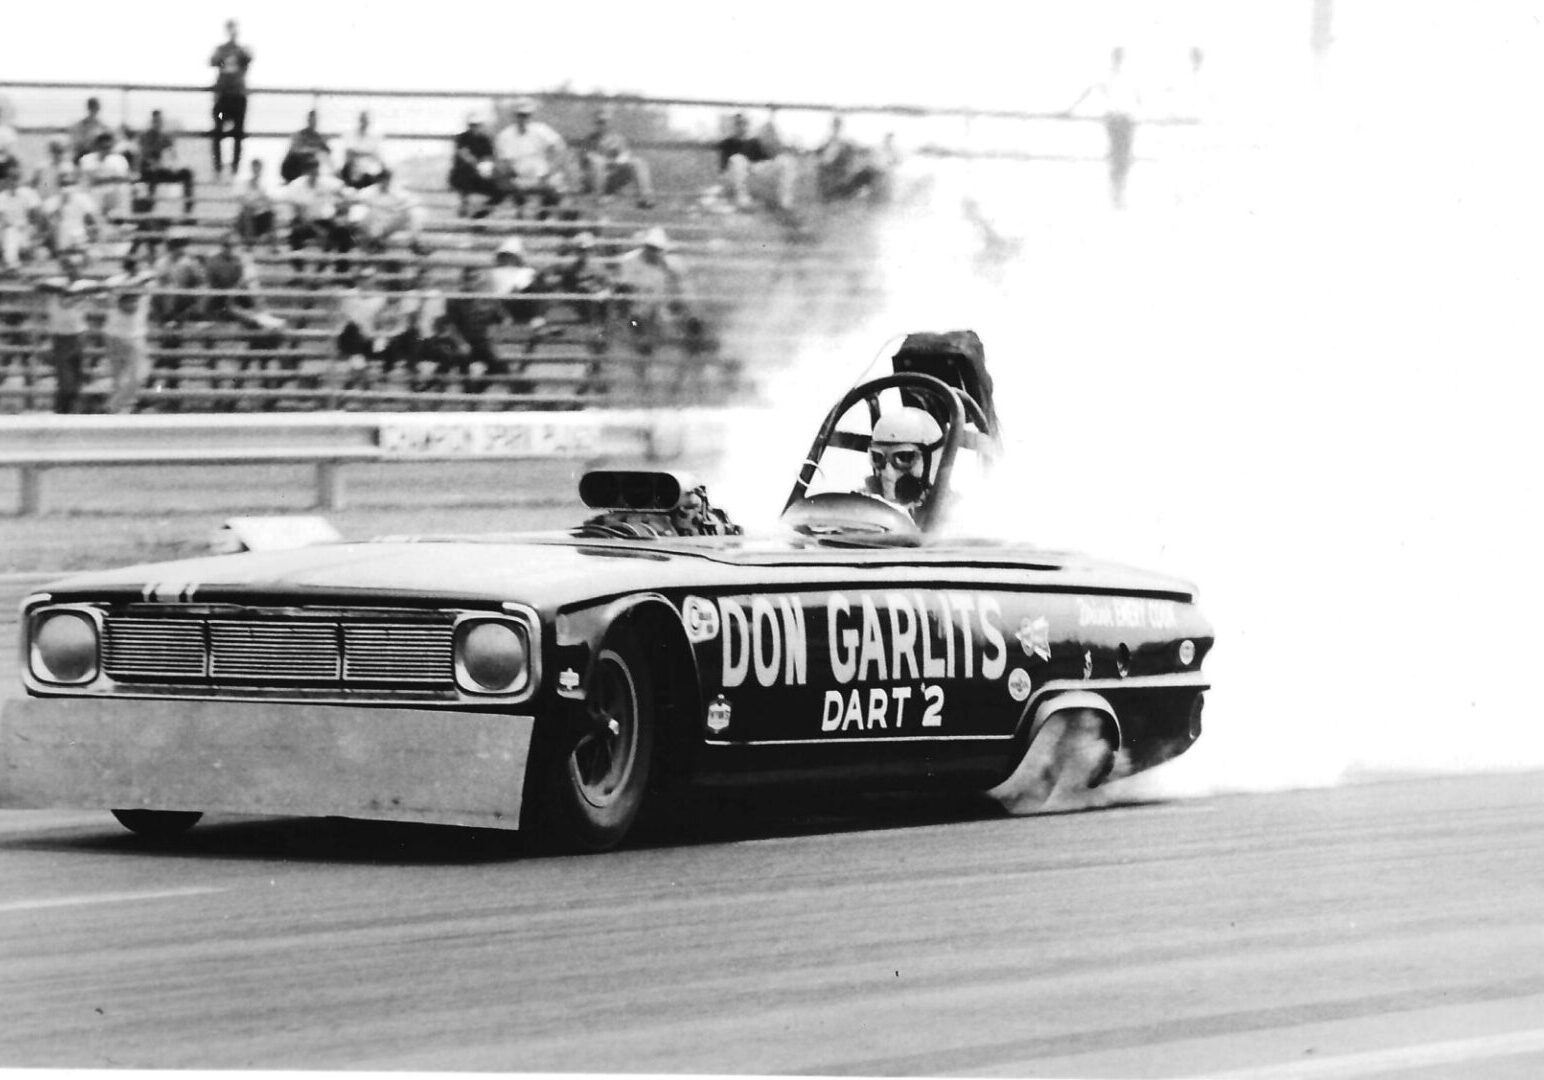 Built in Troy, Mich. By Emery Cook and Don Garlits for Dodge. Was the first plastic bodied, steel tubing funny car to exceed 200 MPH in a quarter mile. Swamp Rat 9 was outlawed by NHRA in late 1966 due to the body not being a true Funny War and weighing considerably less than other cars in the class.  